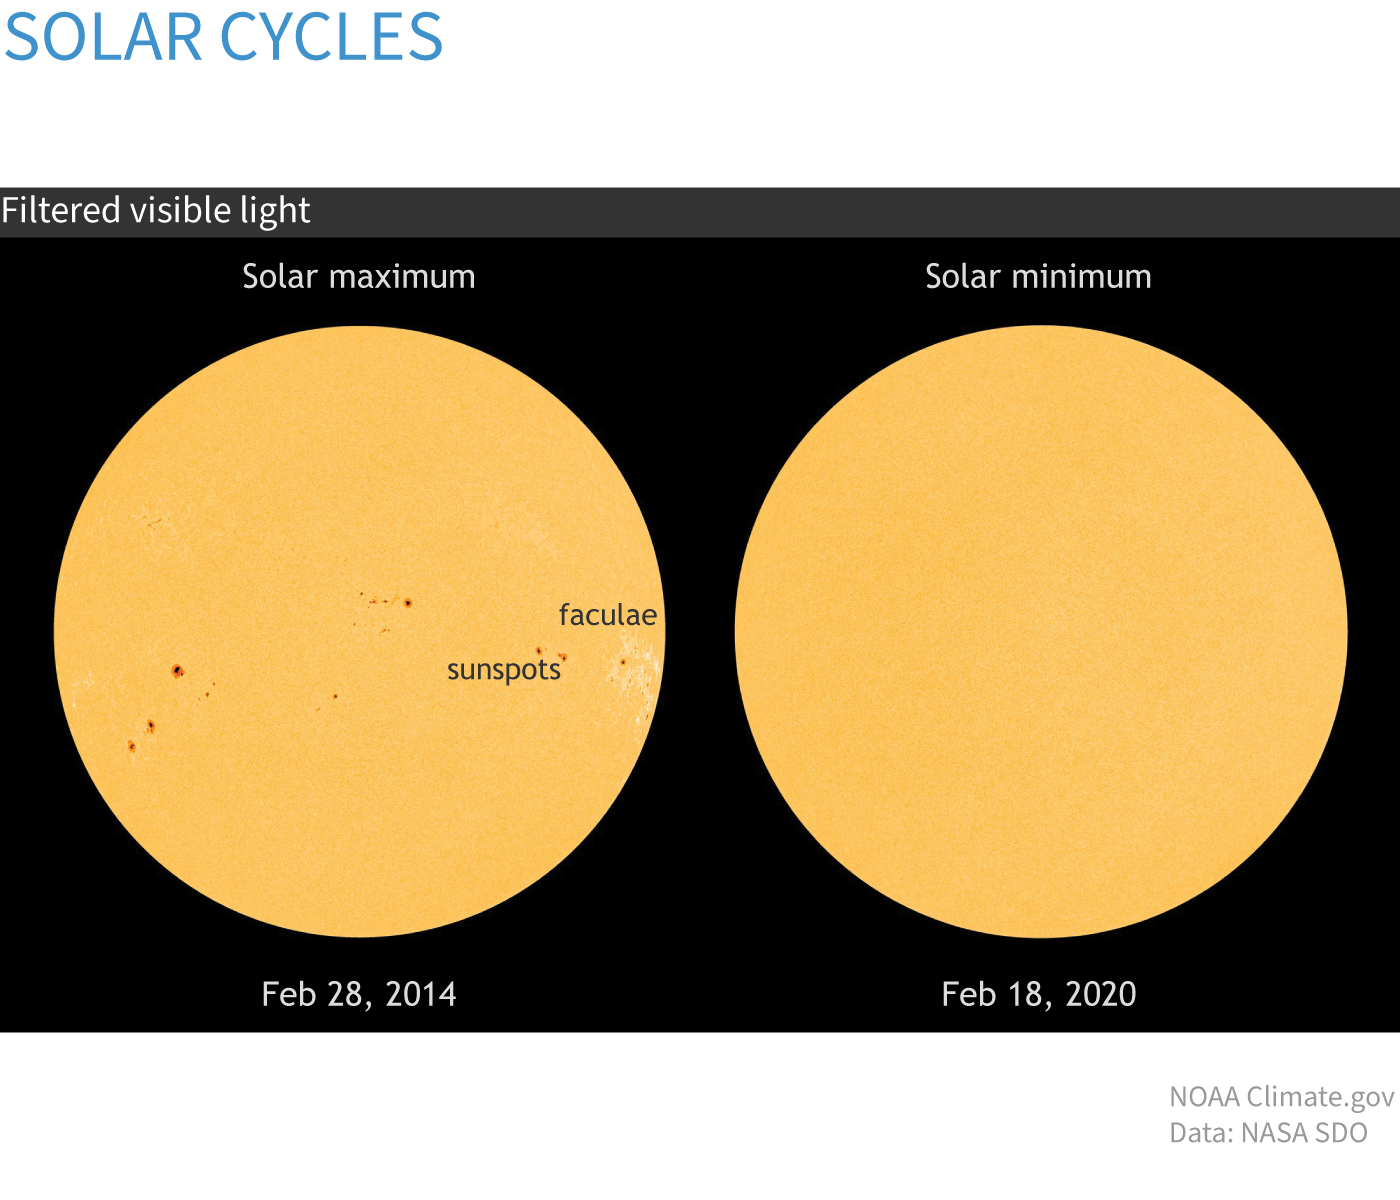 VIsible light images of sunspots on the solar disk